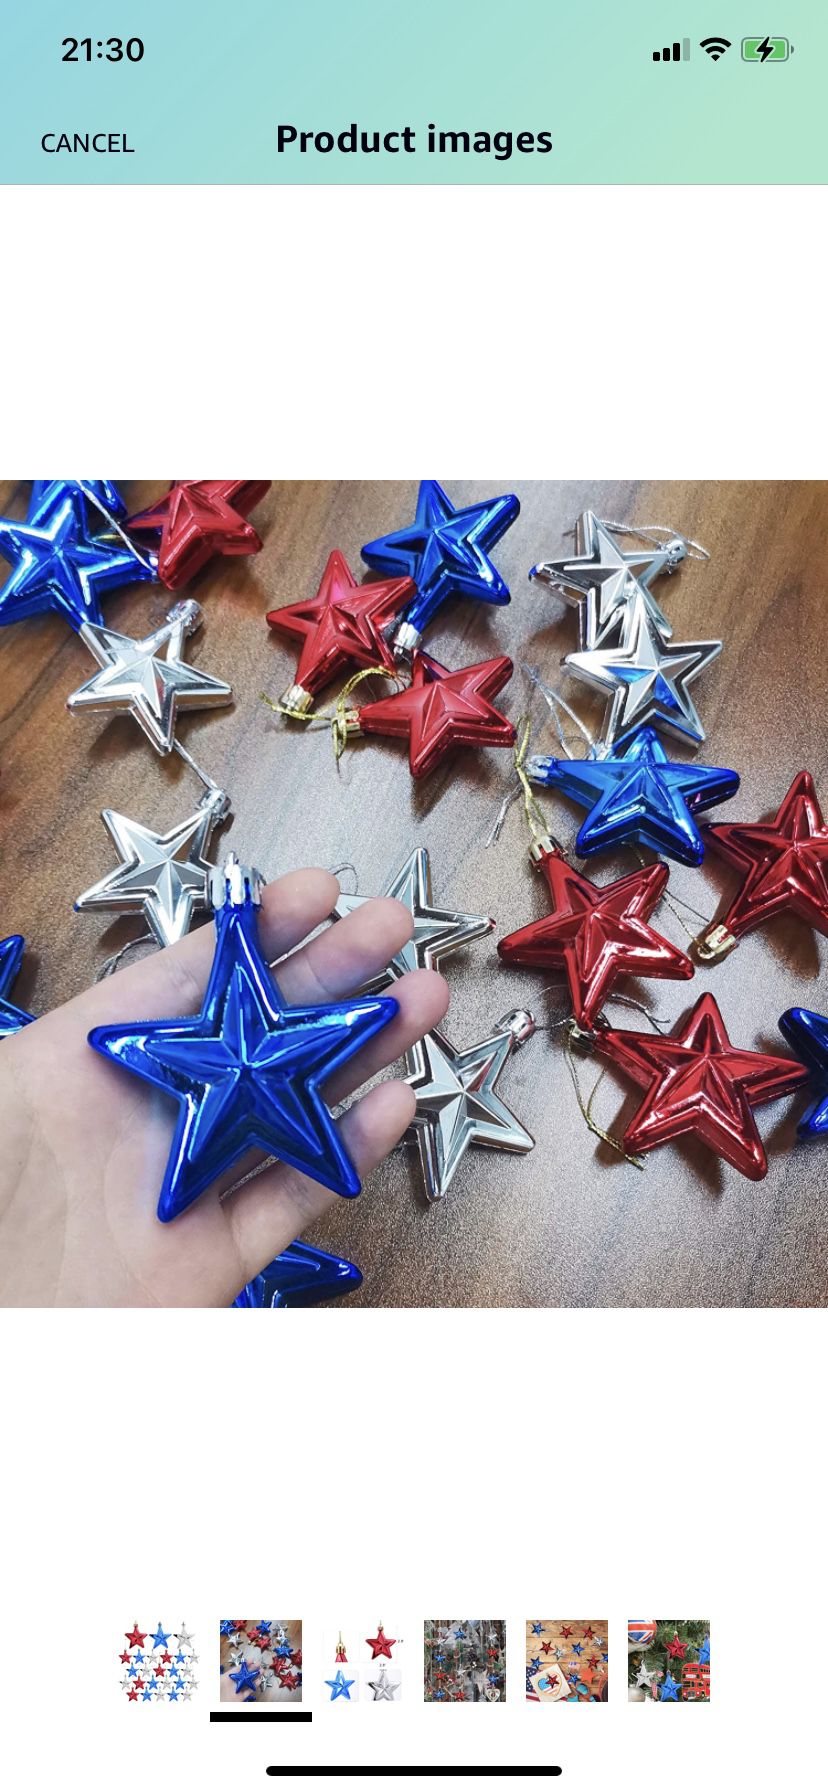 24 Pieces Hanging Star Ornaments,4th of July Patriotic Day Hanging Star Decorations Christmas Star Ornament,for Indoor Outdoor Party Decor DIY Craft, 